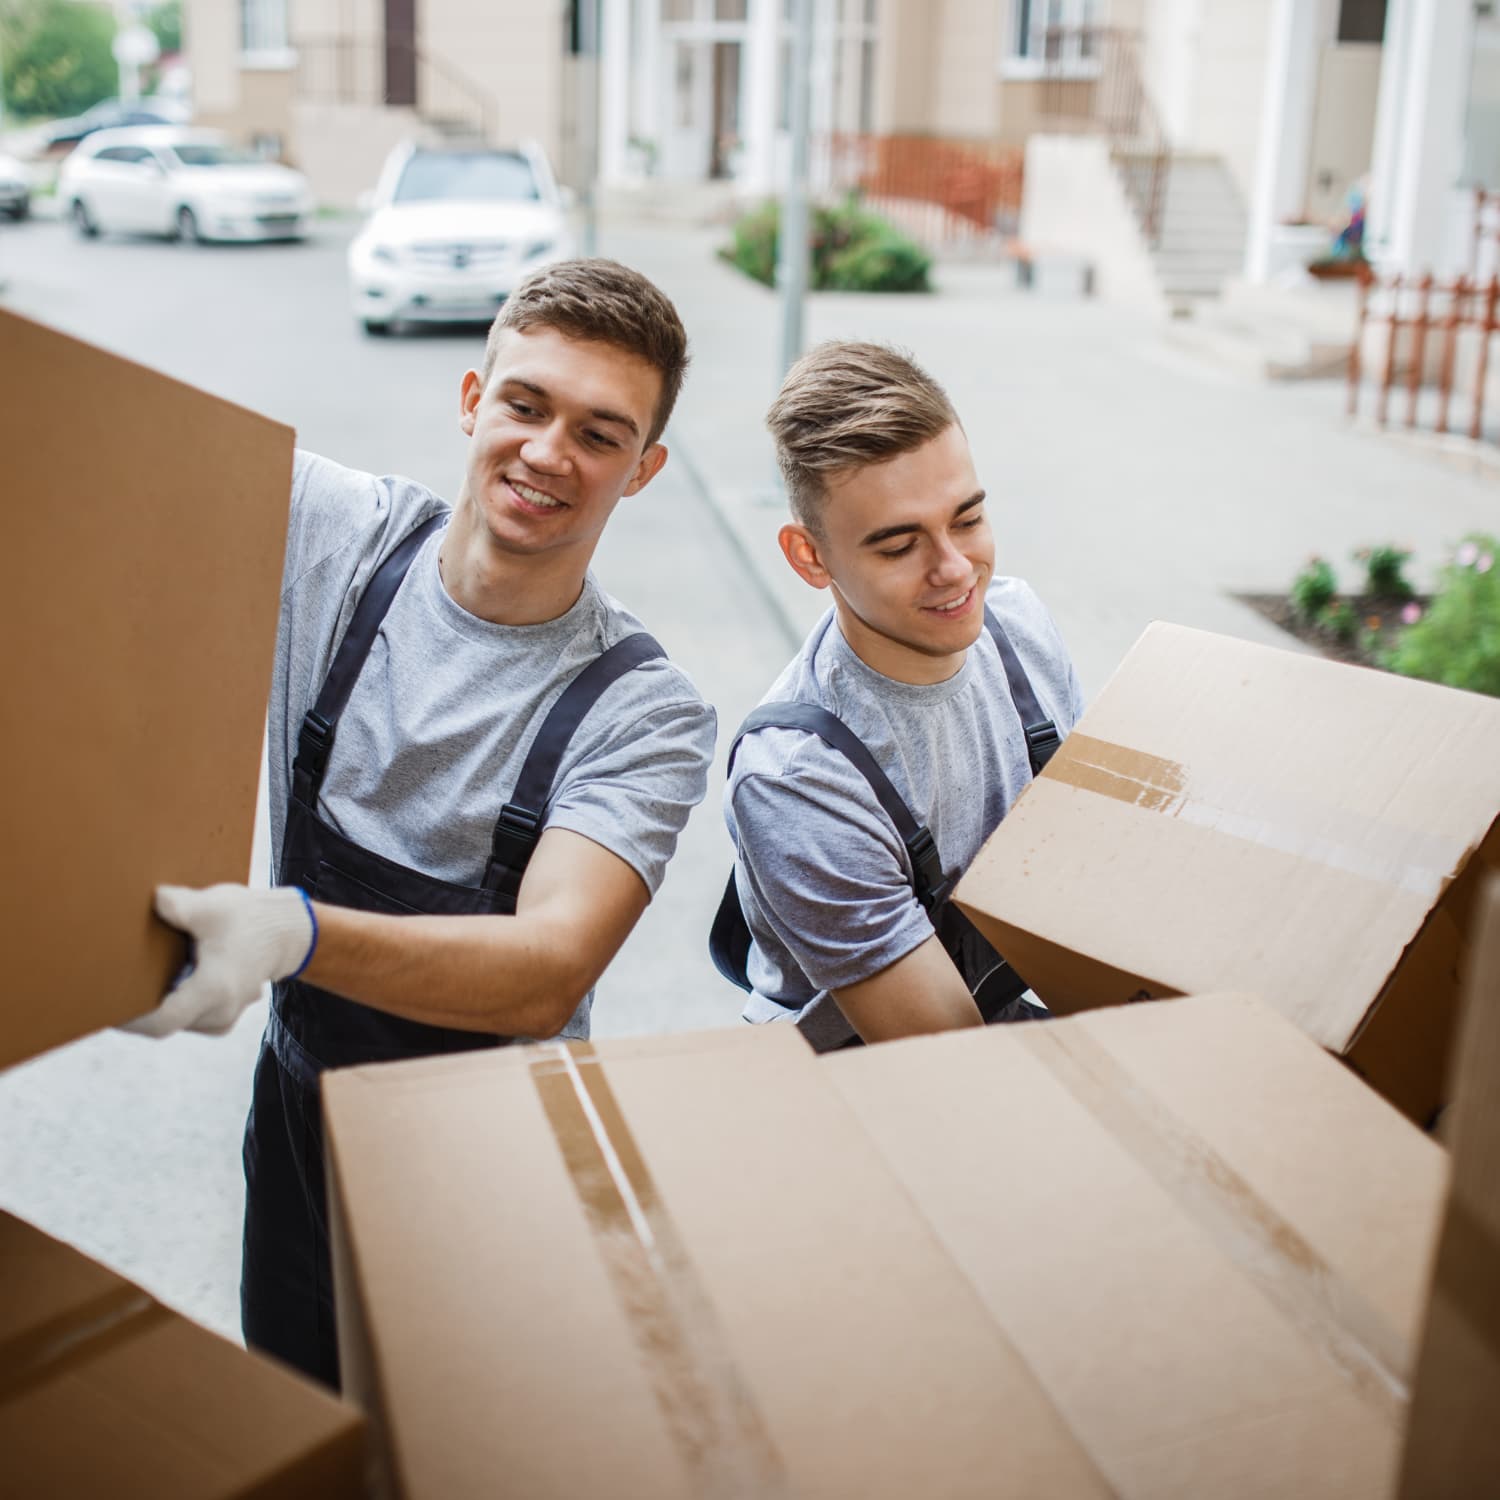 How Much Does Hiring Full-Service Moving Companies Cost?